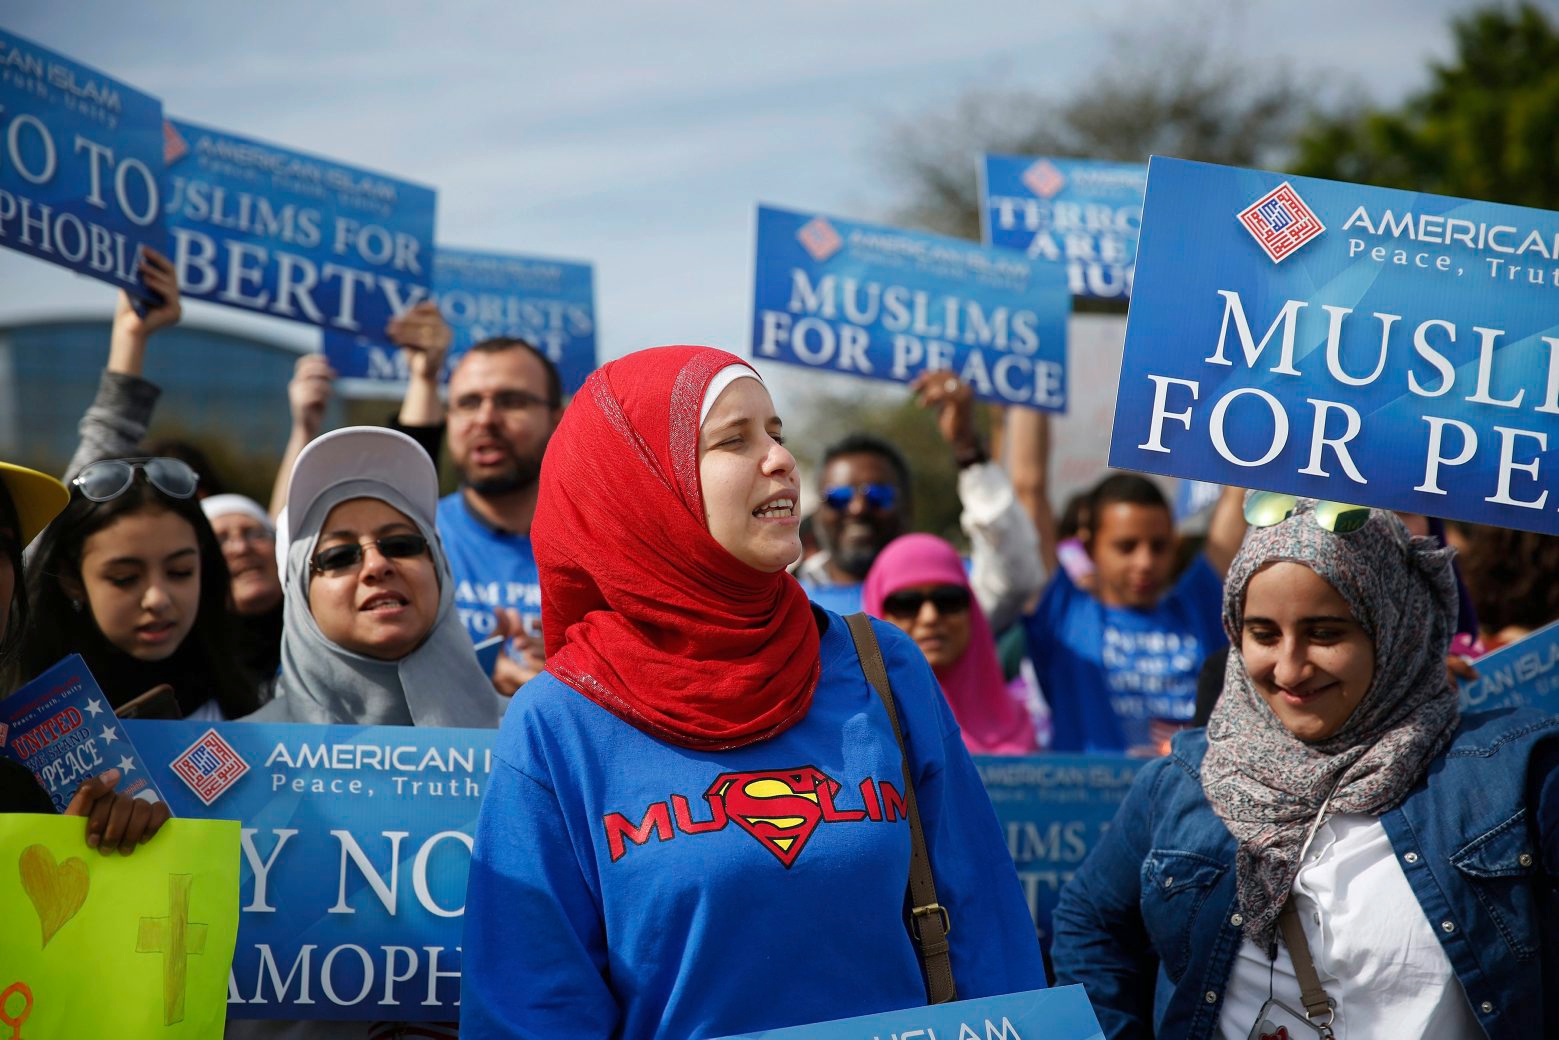 Protesters stand across the street from a Donald Trump rally holding signs for "Muslims for Peace," signs before a campaign rally, Saturday, March 5, 2016, in Orlando, Fla. (AP Photo/Brynn Anderson) GOP 2016 Trump